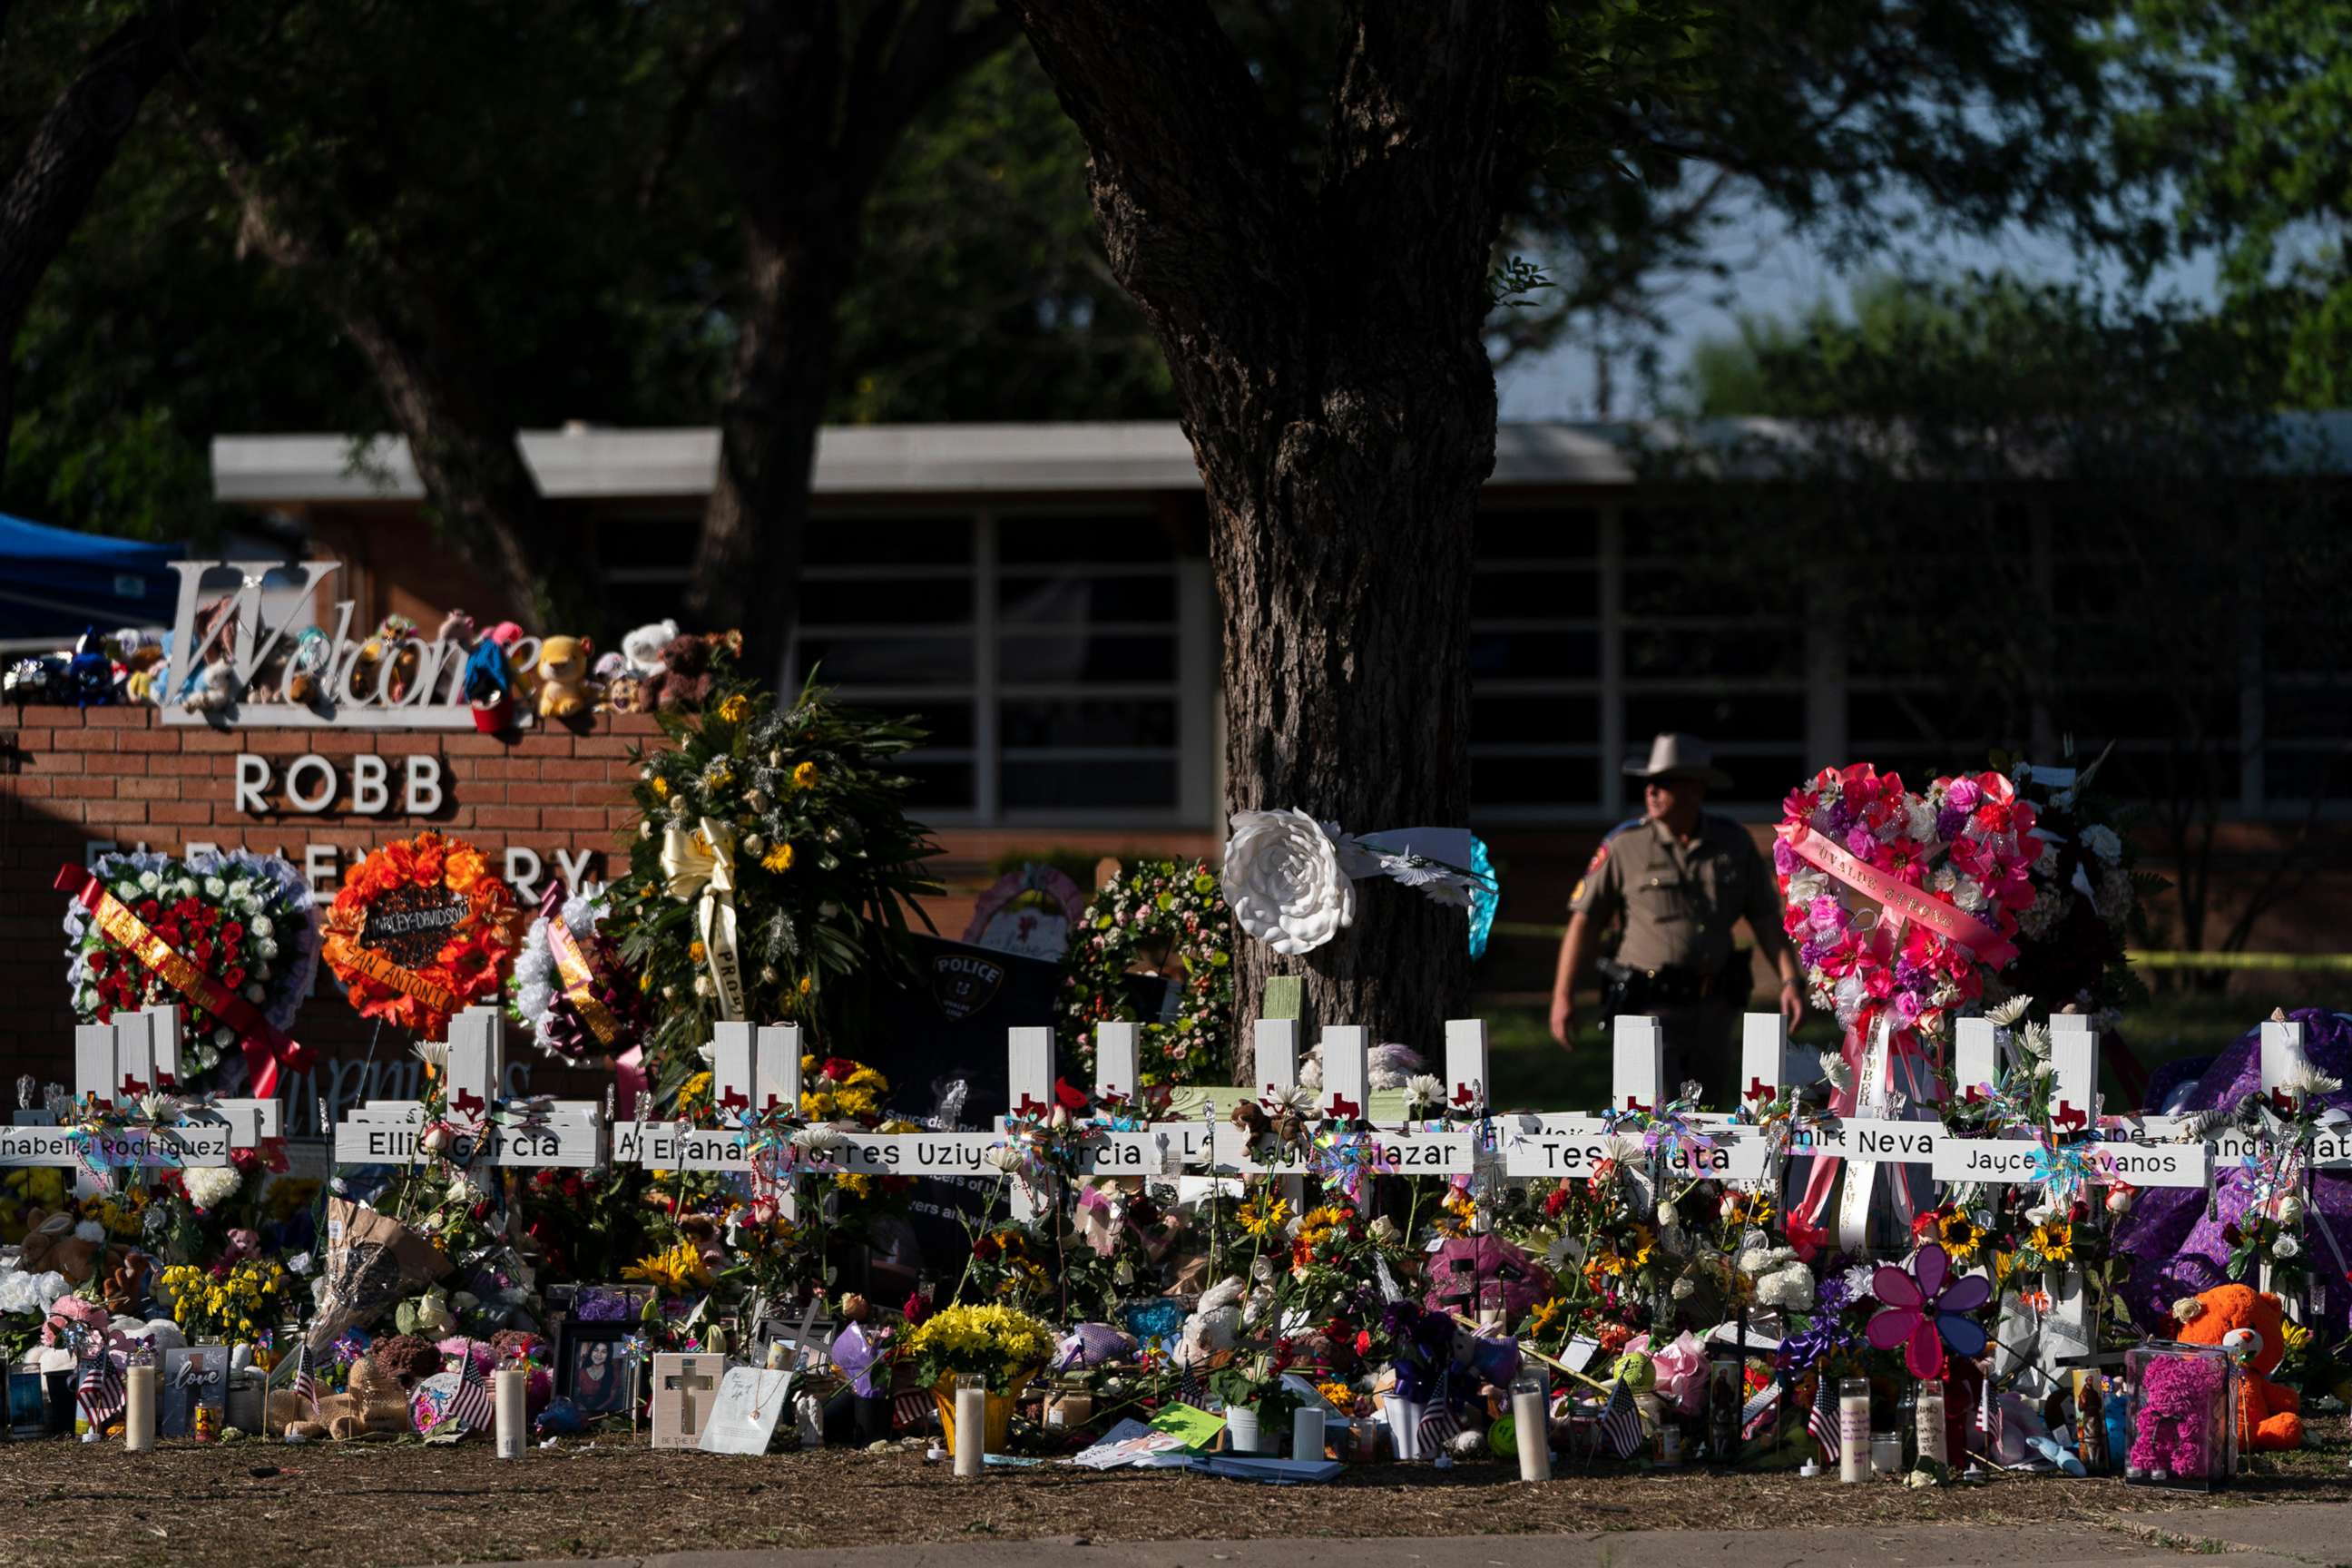 PHOTO: Flowers and candles are placed around crosses, May 28, 2022, at a memorial outside Robb Elementary School in Uvalde, Texas, to honor the victims killed in the school shooting a few days prior.